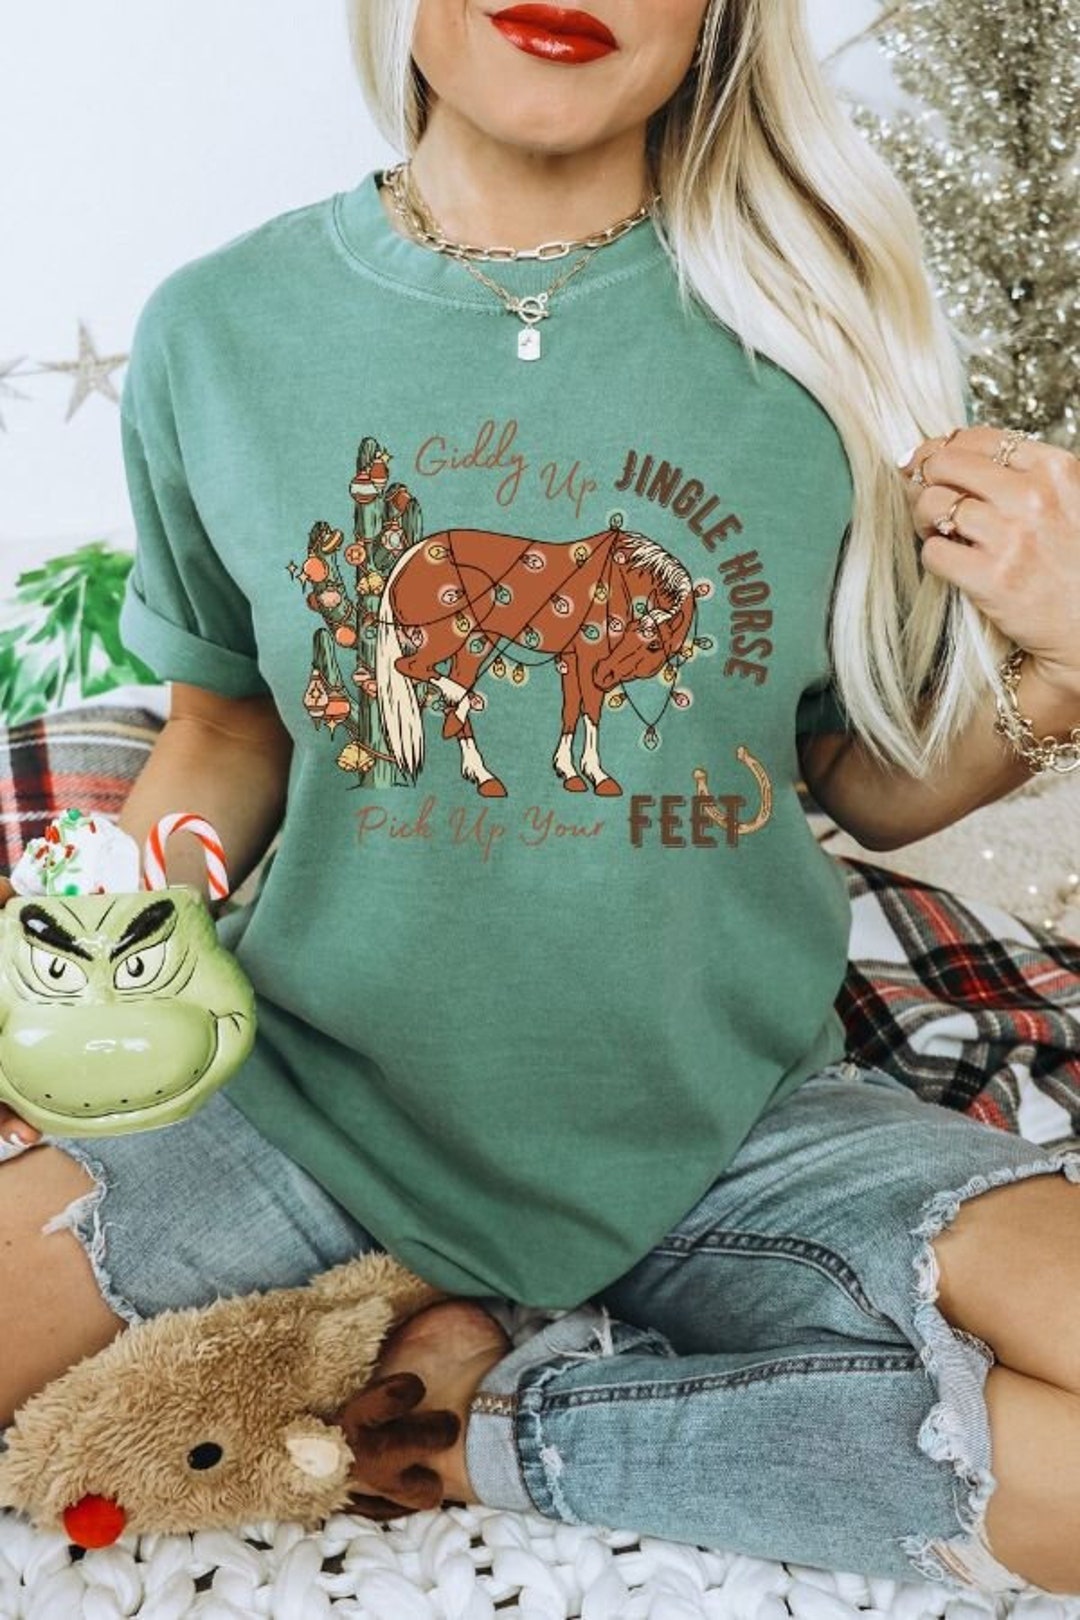 Giddy up Jingle Horse Comfort Colors Shirt, Western Graphic Tee ...